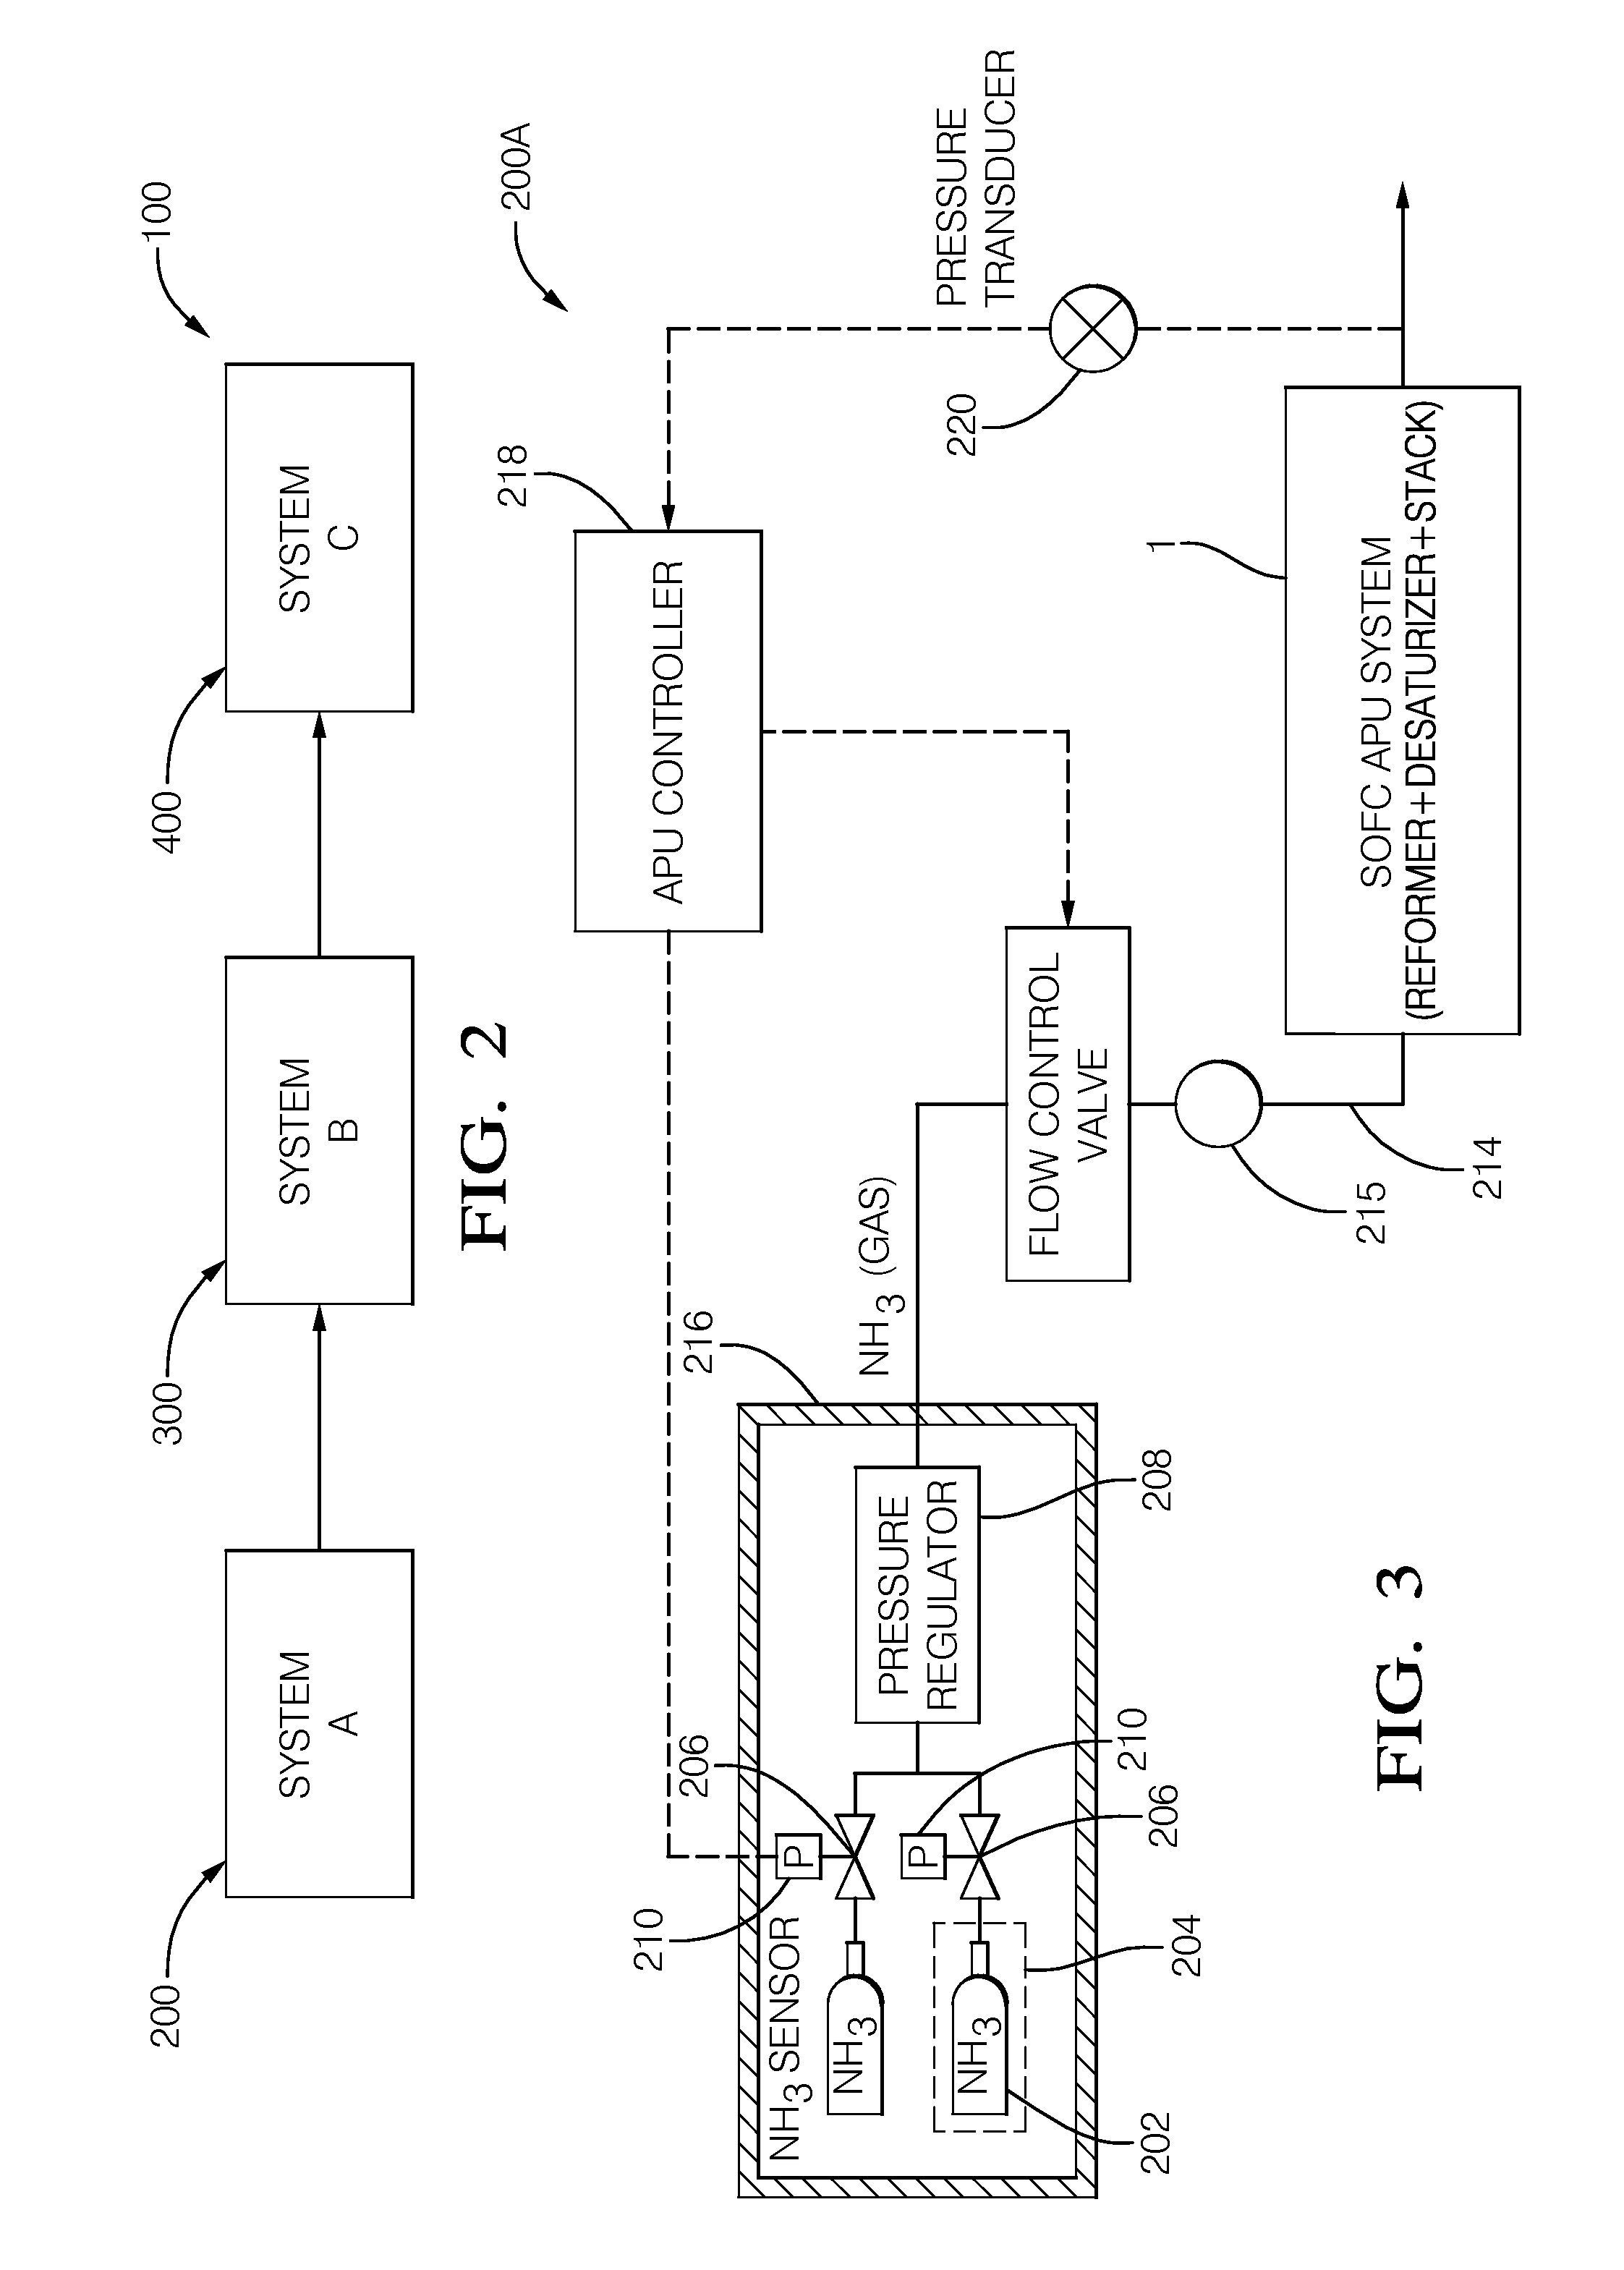 Anode protection system for shutdown of solid oxide fuel cell system